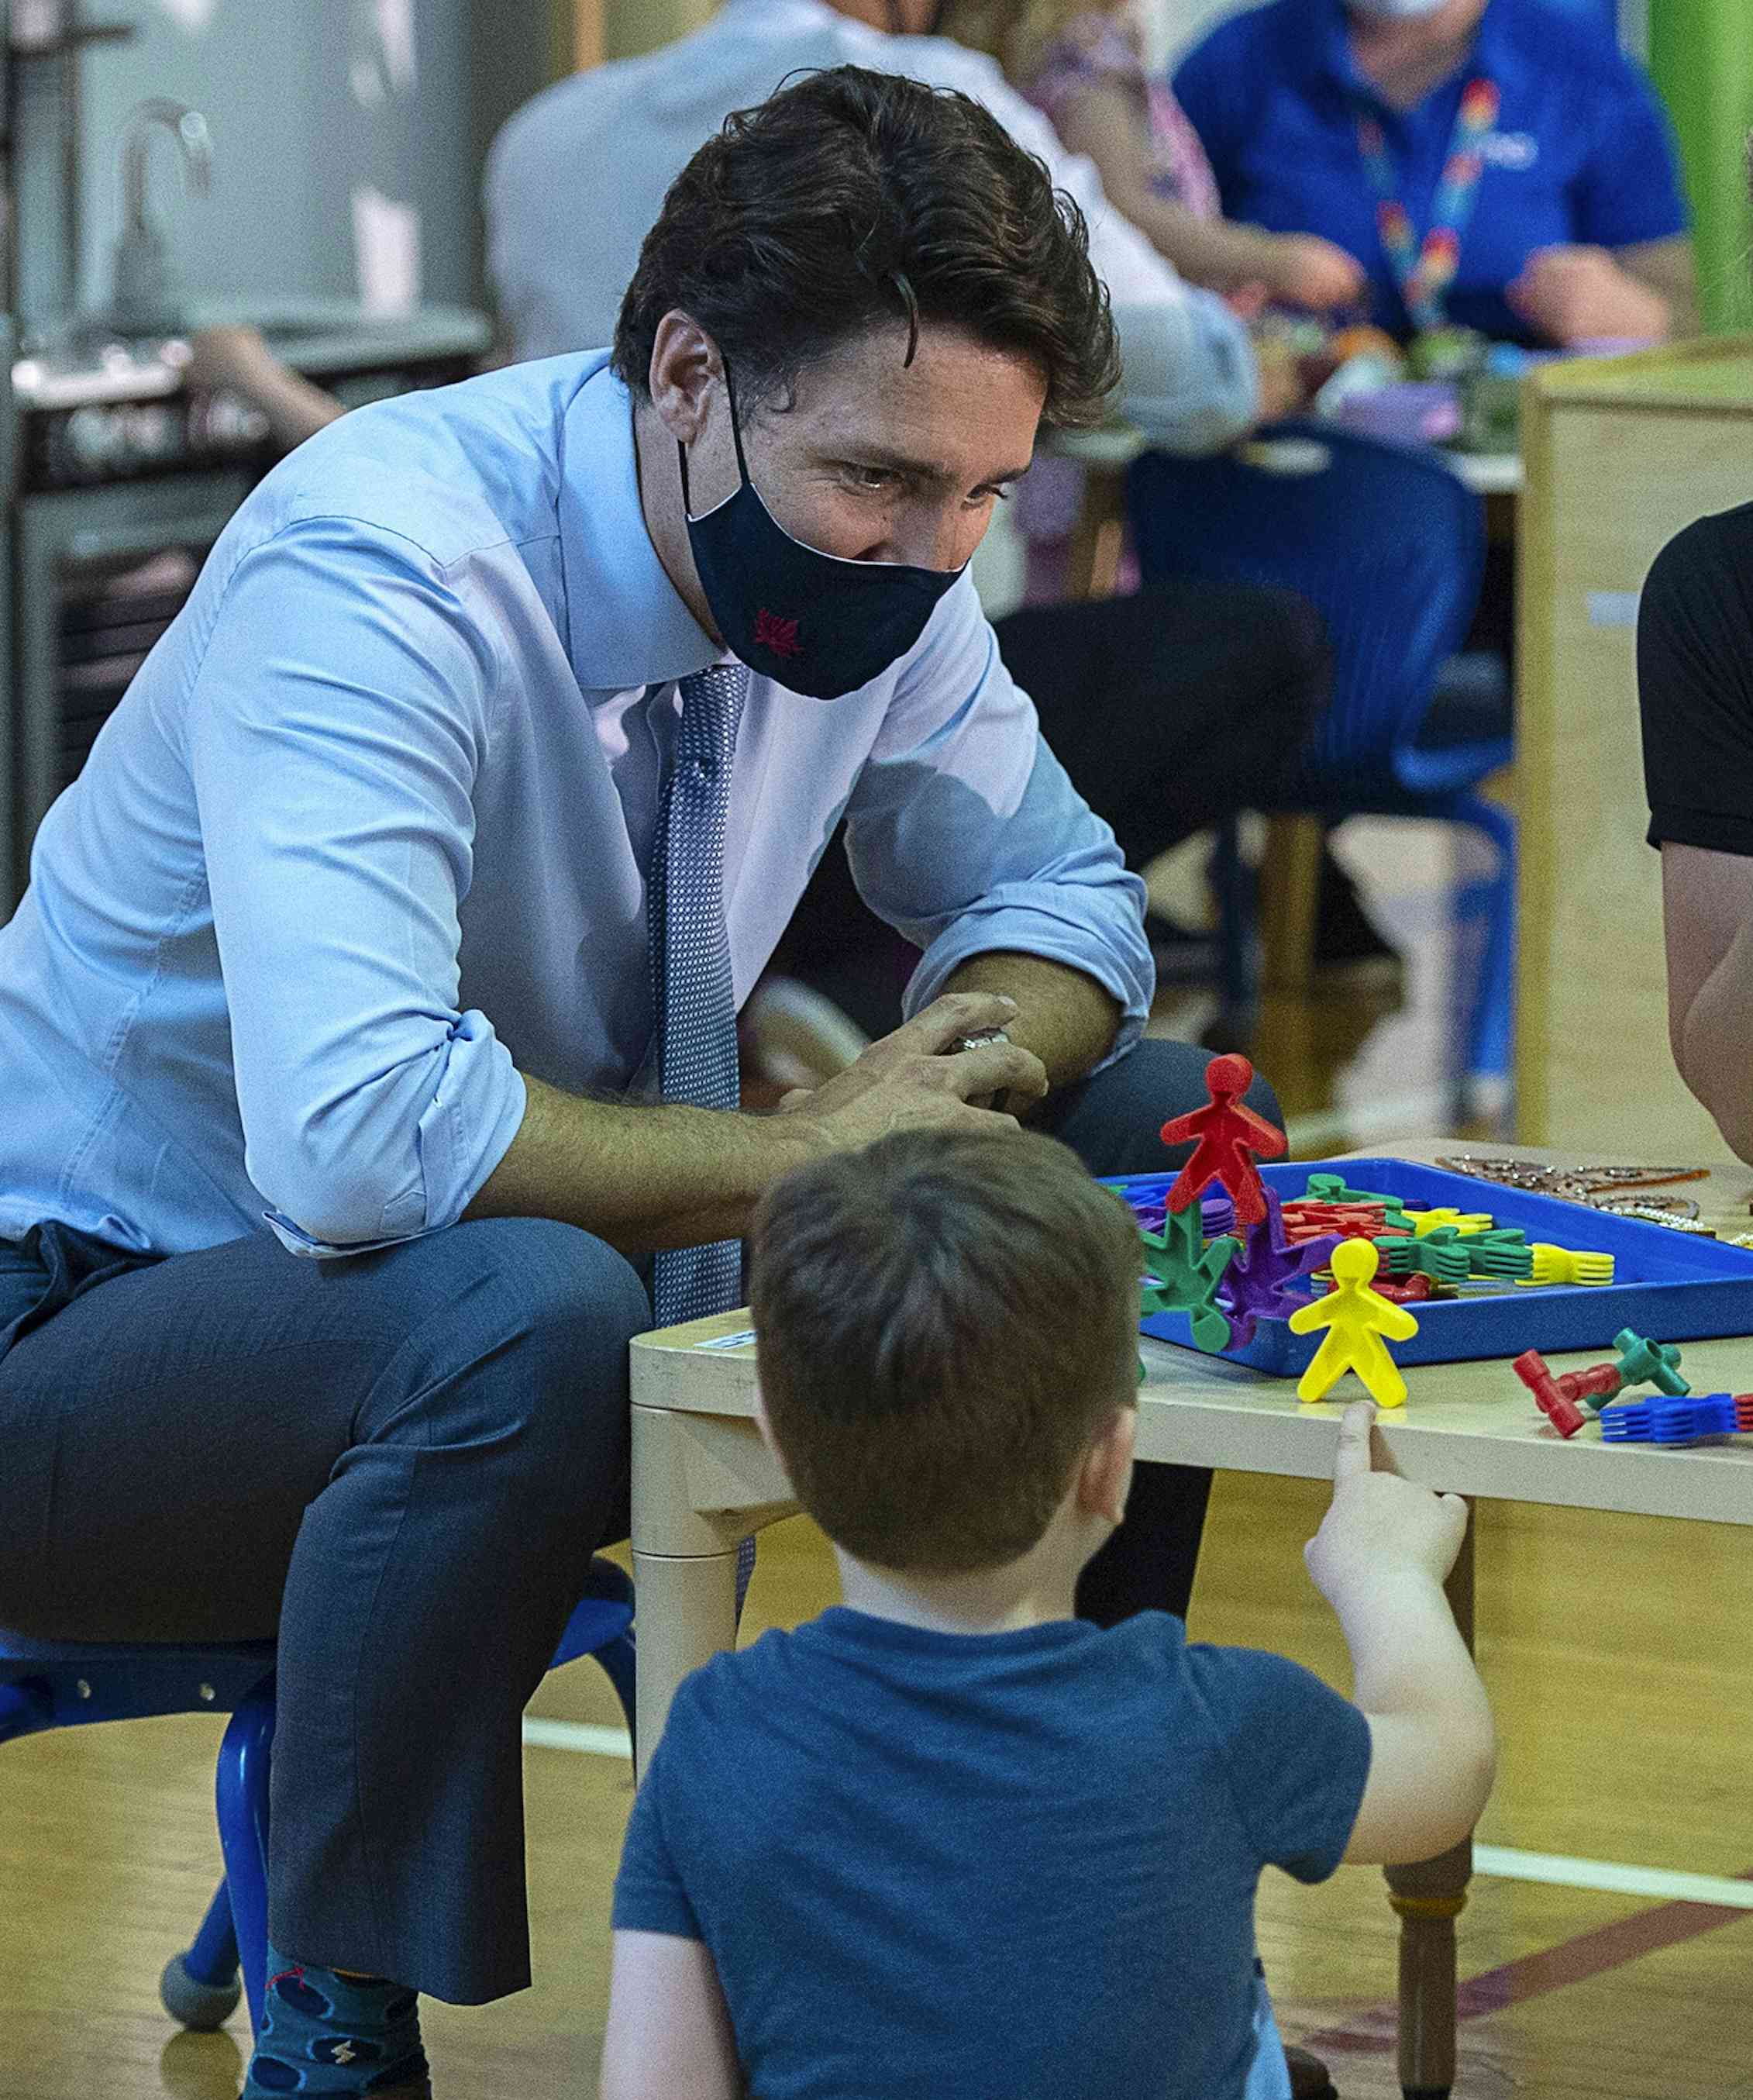 Prime Minister Trudeau seen in a tie and face mask crouching at a child care centre.